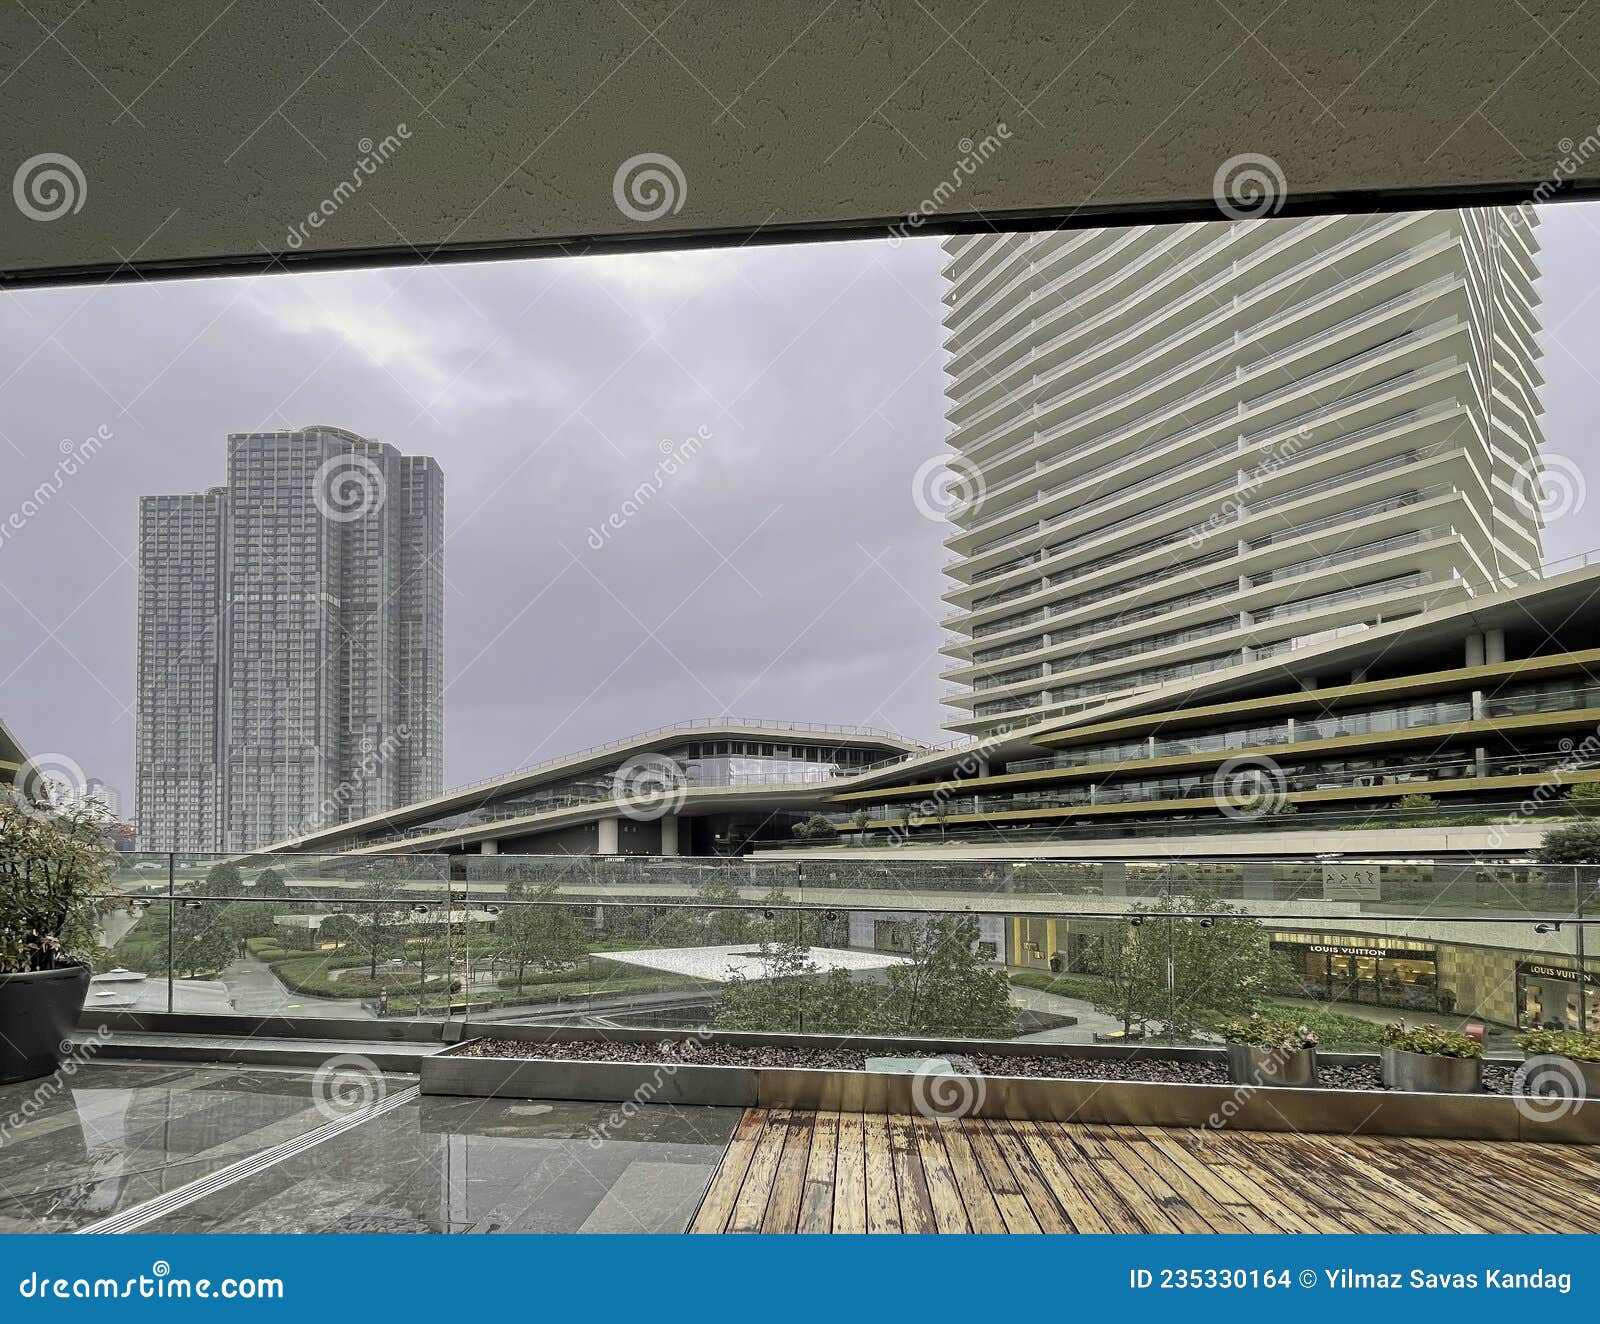 External View from Zorlu Shopping Mall on a Rainy Day in Istanbul